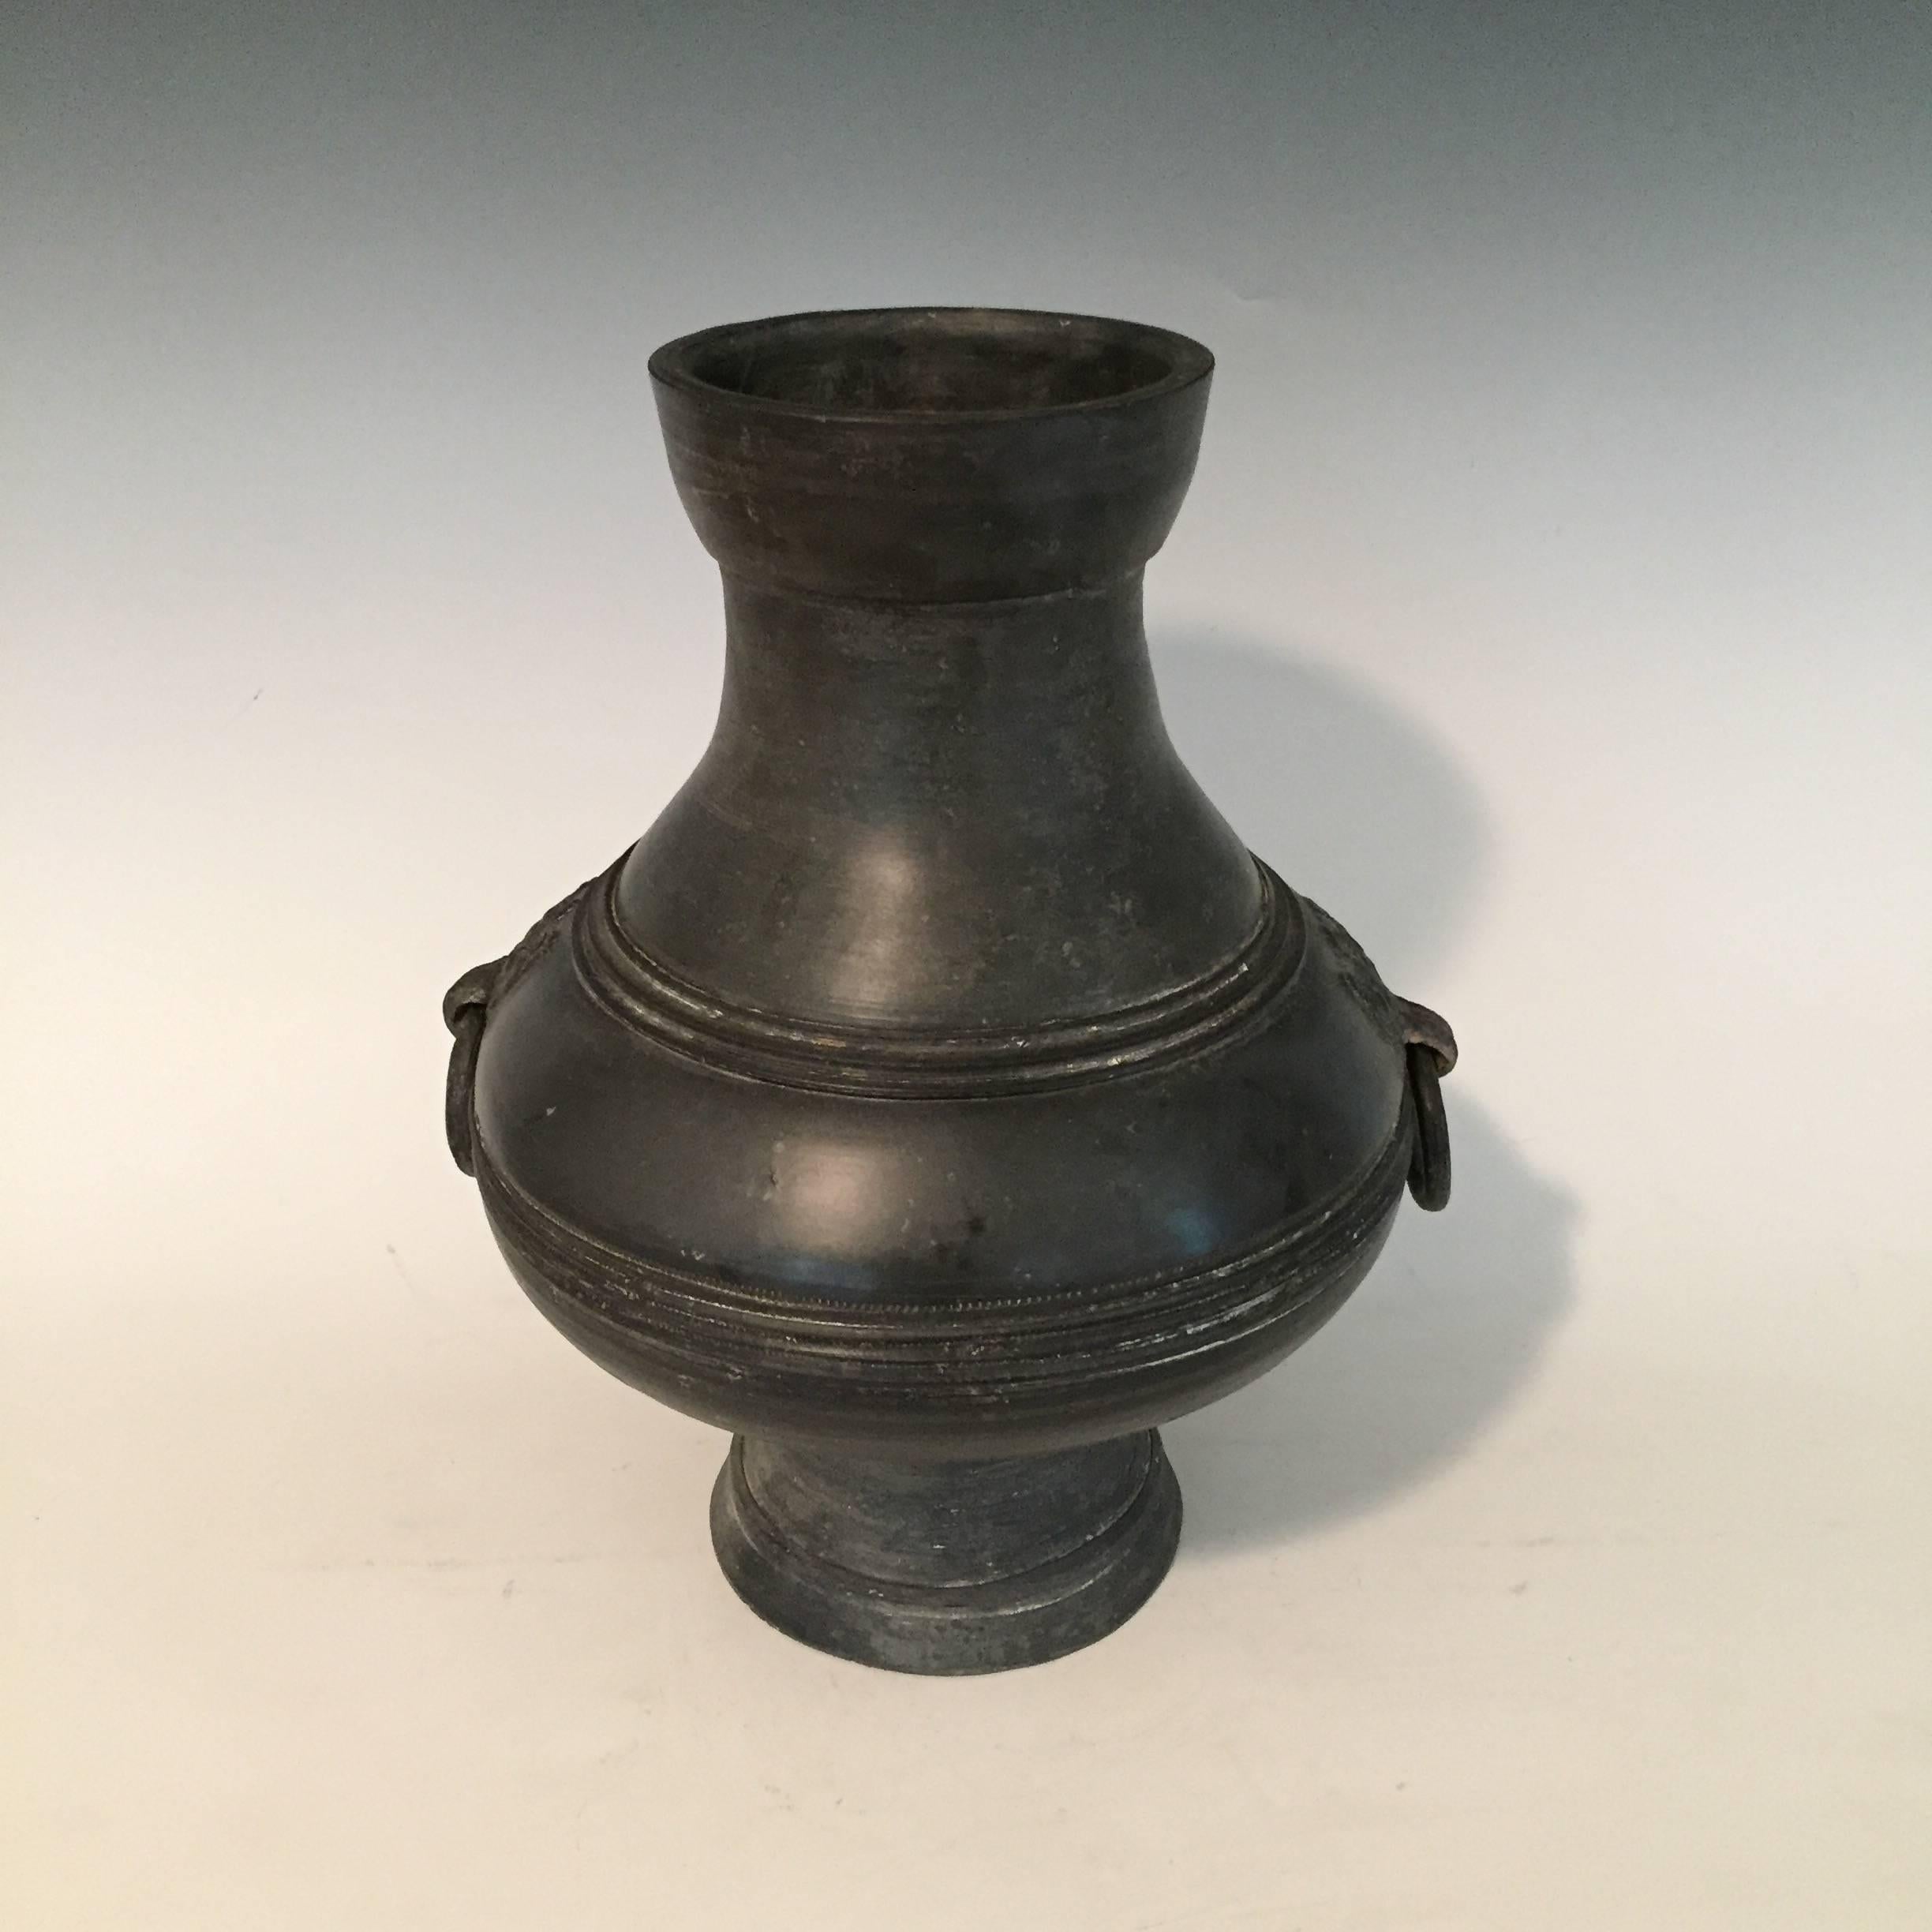 Offered by J R Richards
An ancient Chinese pottery jar dating to the late Warring States period - Western Han dynasty. ((221–206 BC).
Of elegant form characteristic of earlier bronze shapes.
A rare jar featuring black pottery with two Taotie Masks